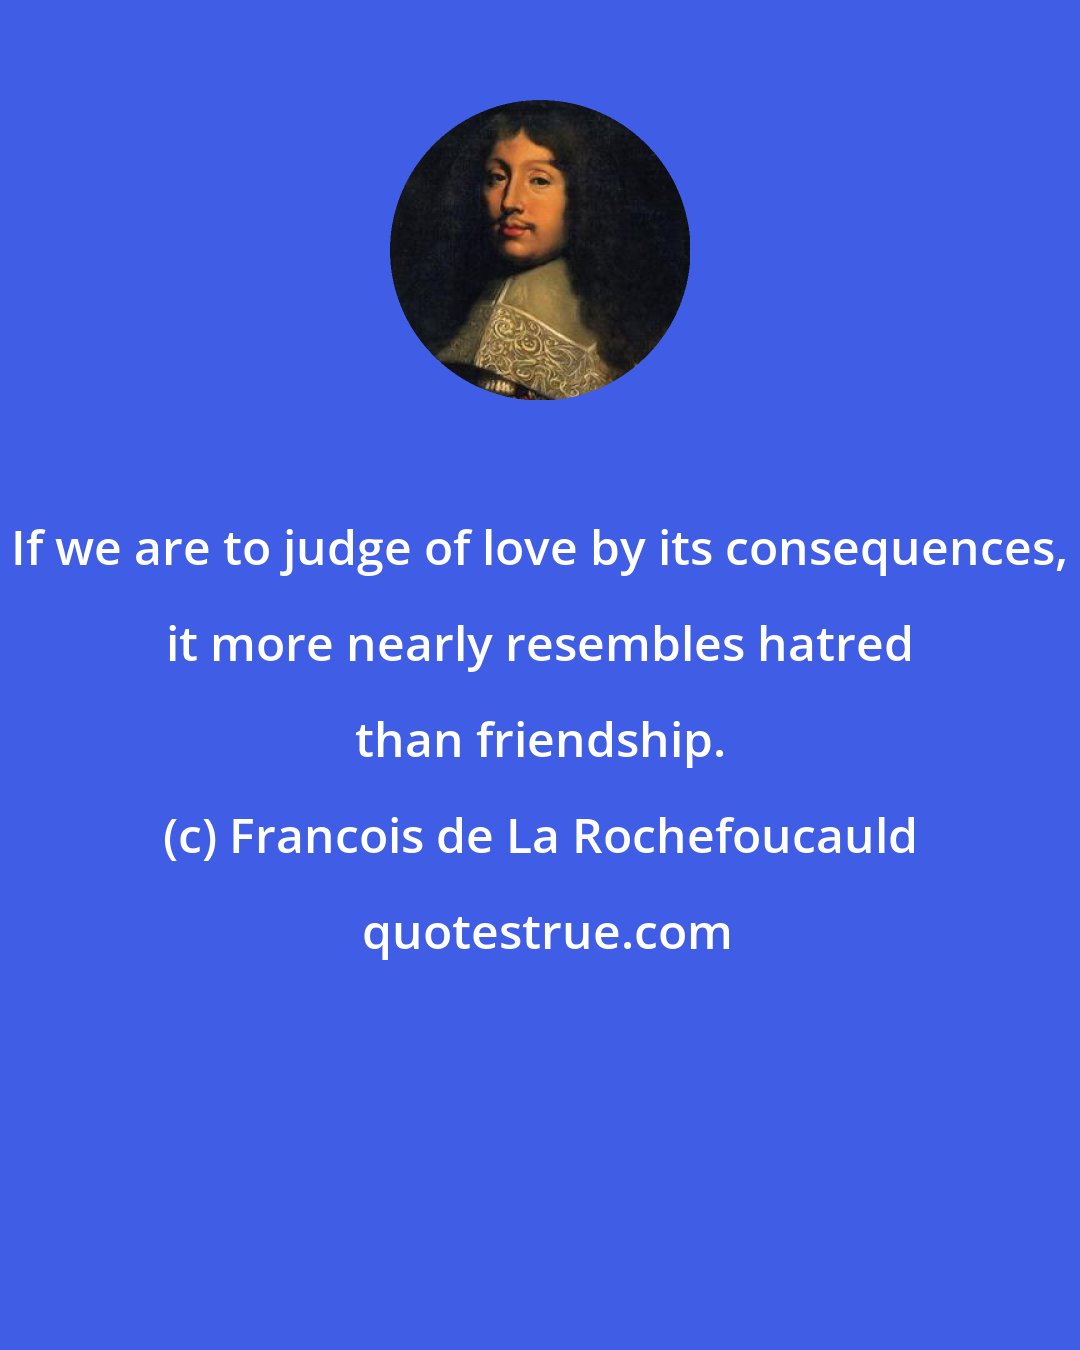 Francois de La Rochefoucauld: If we are to judge of love by its consequences, it more nearly resembles hatred than friendship.